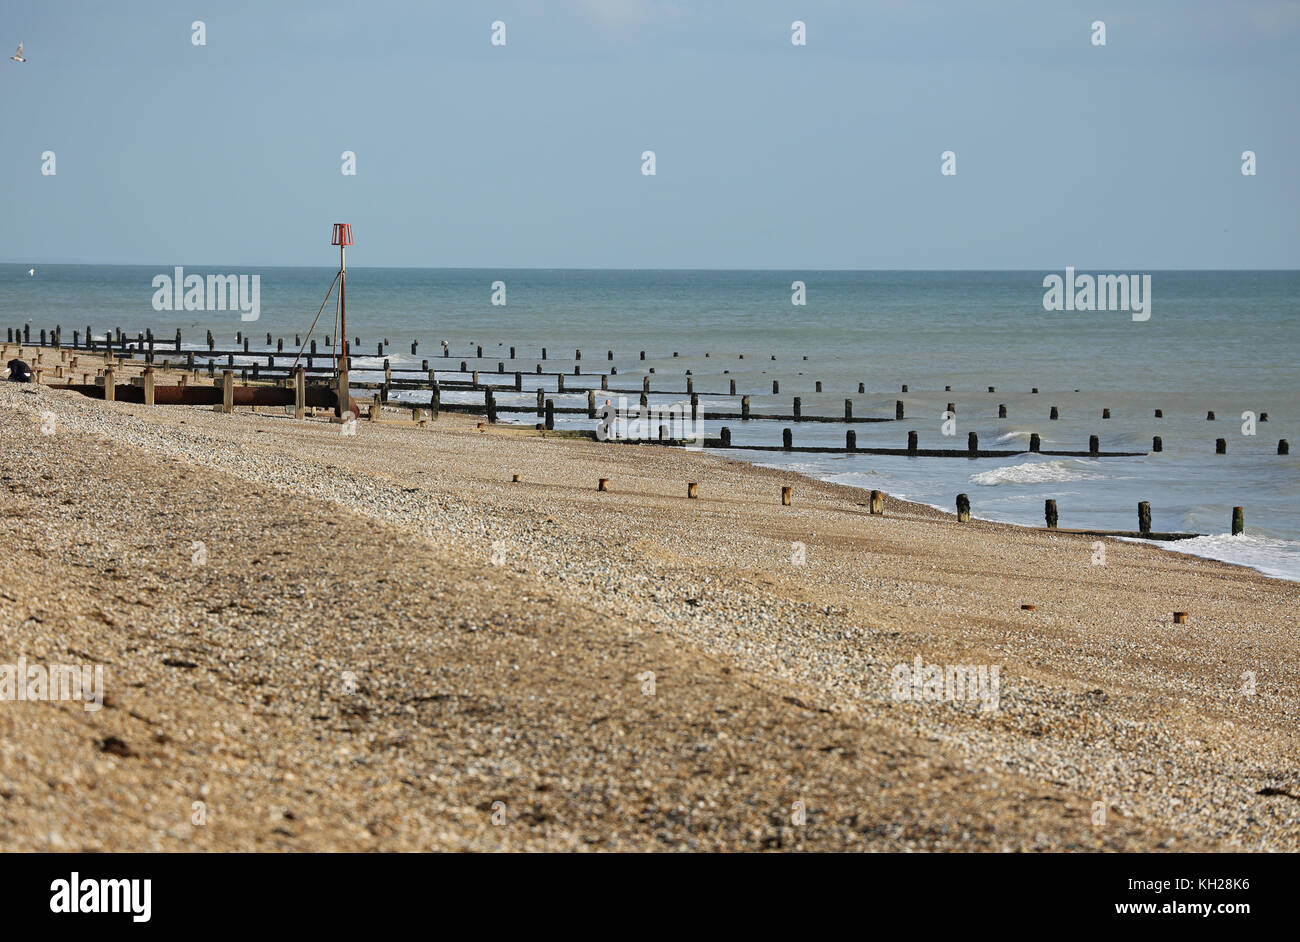 View along deserted Bognor beach, southern England, on a sunny, winter day. Shows wooden breakwater structures installed to prevent coastal erosion. Stock Photo